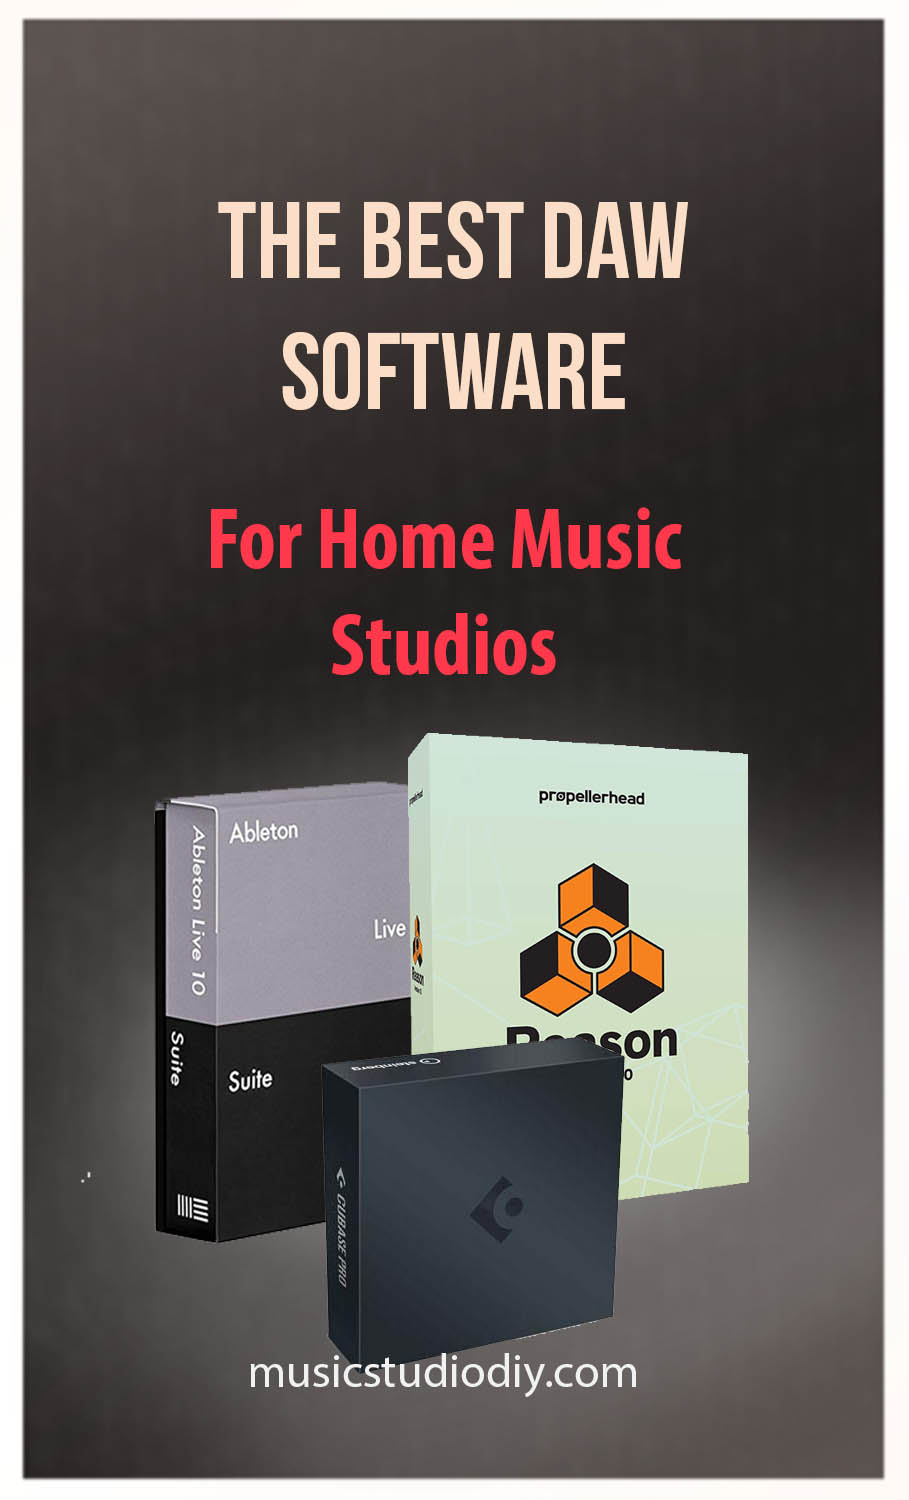 The Best DAW Software for Home Music Production